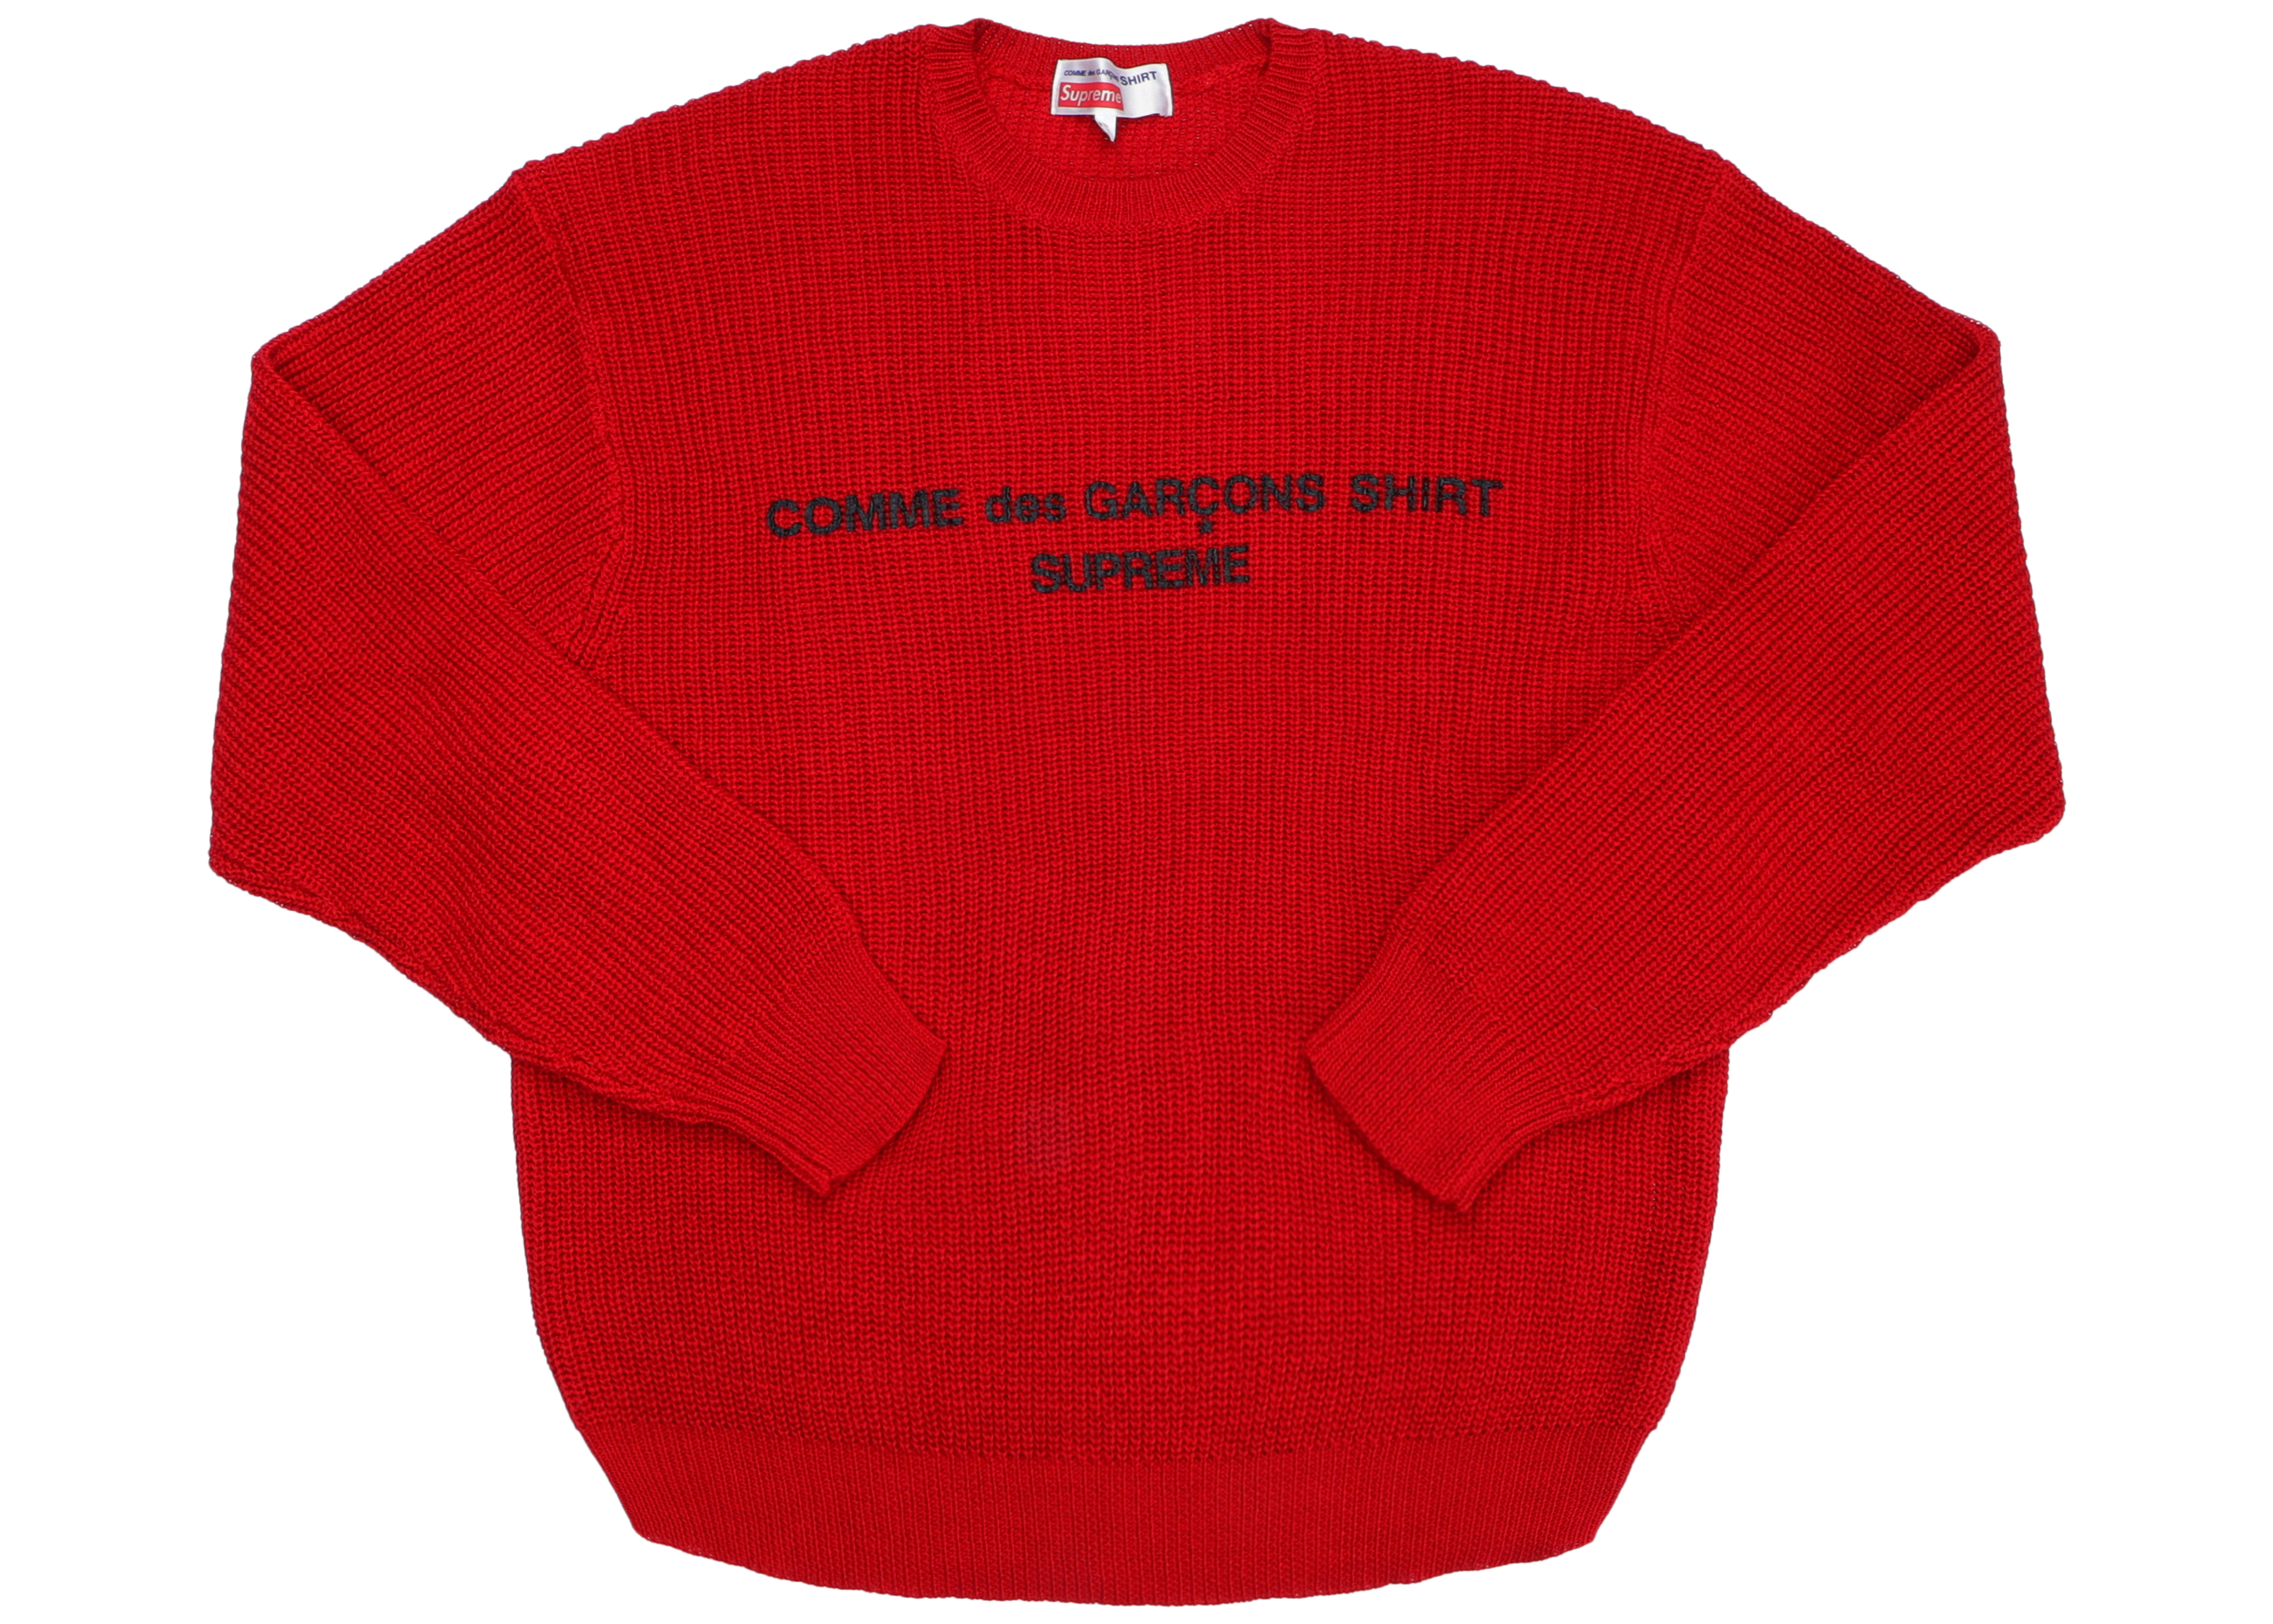 Supreme Comme des Garcons SHIRT Sweater Red